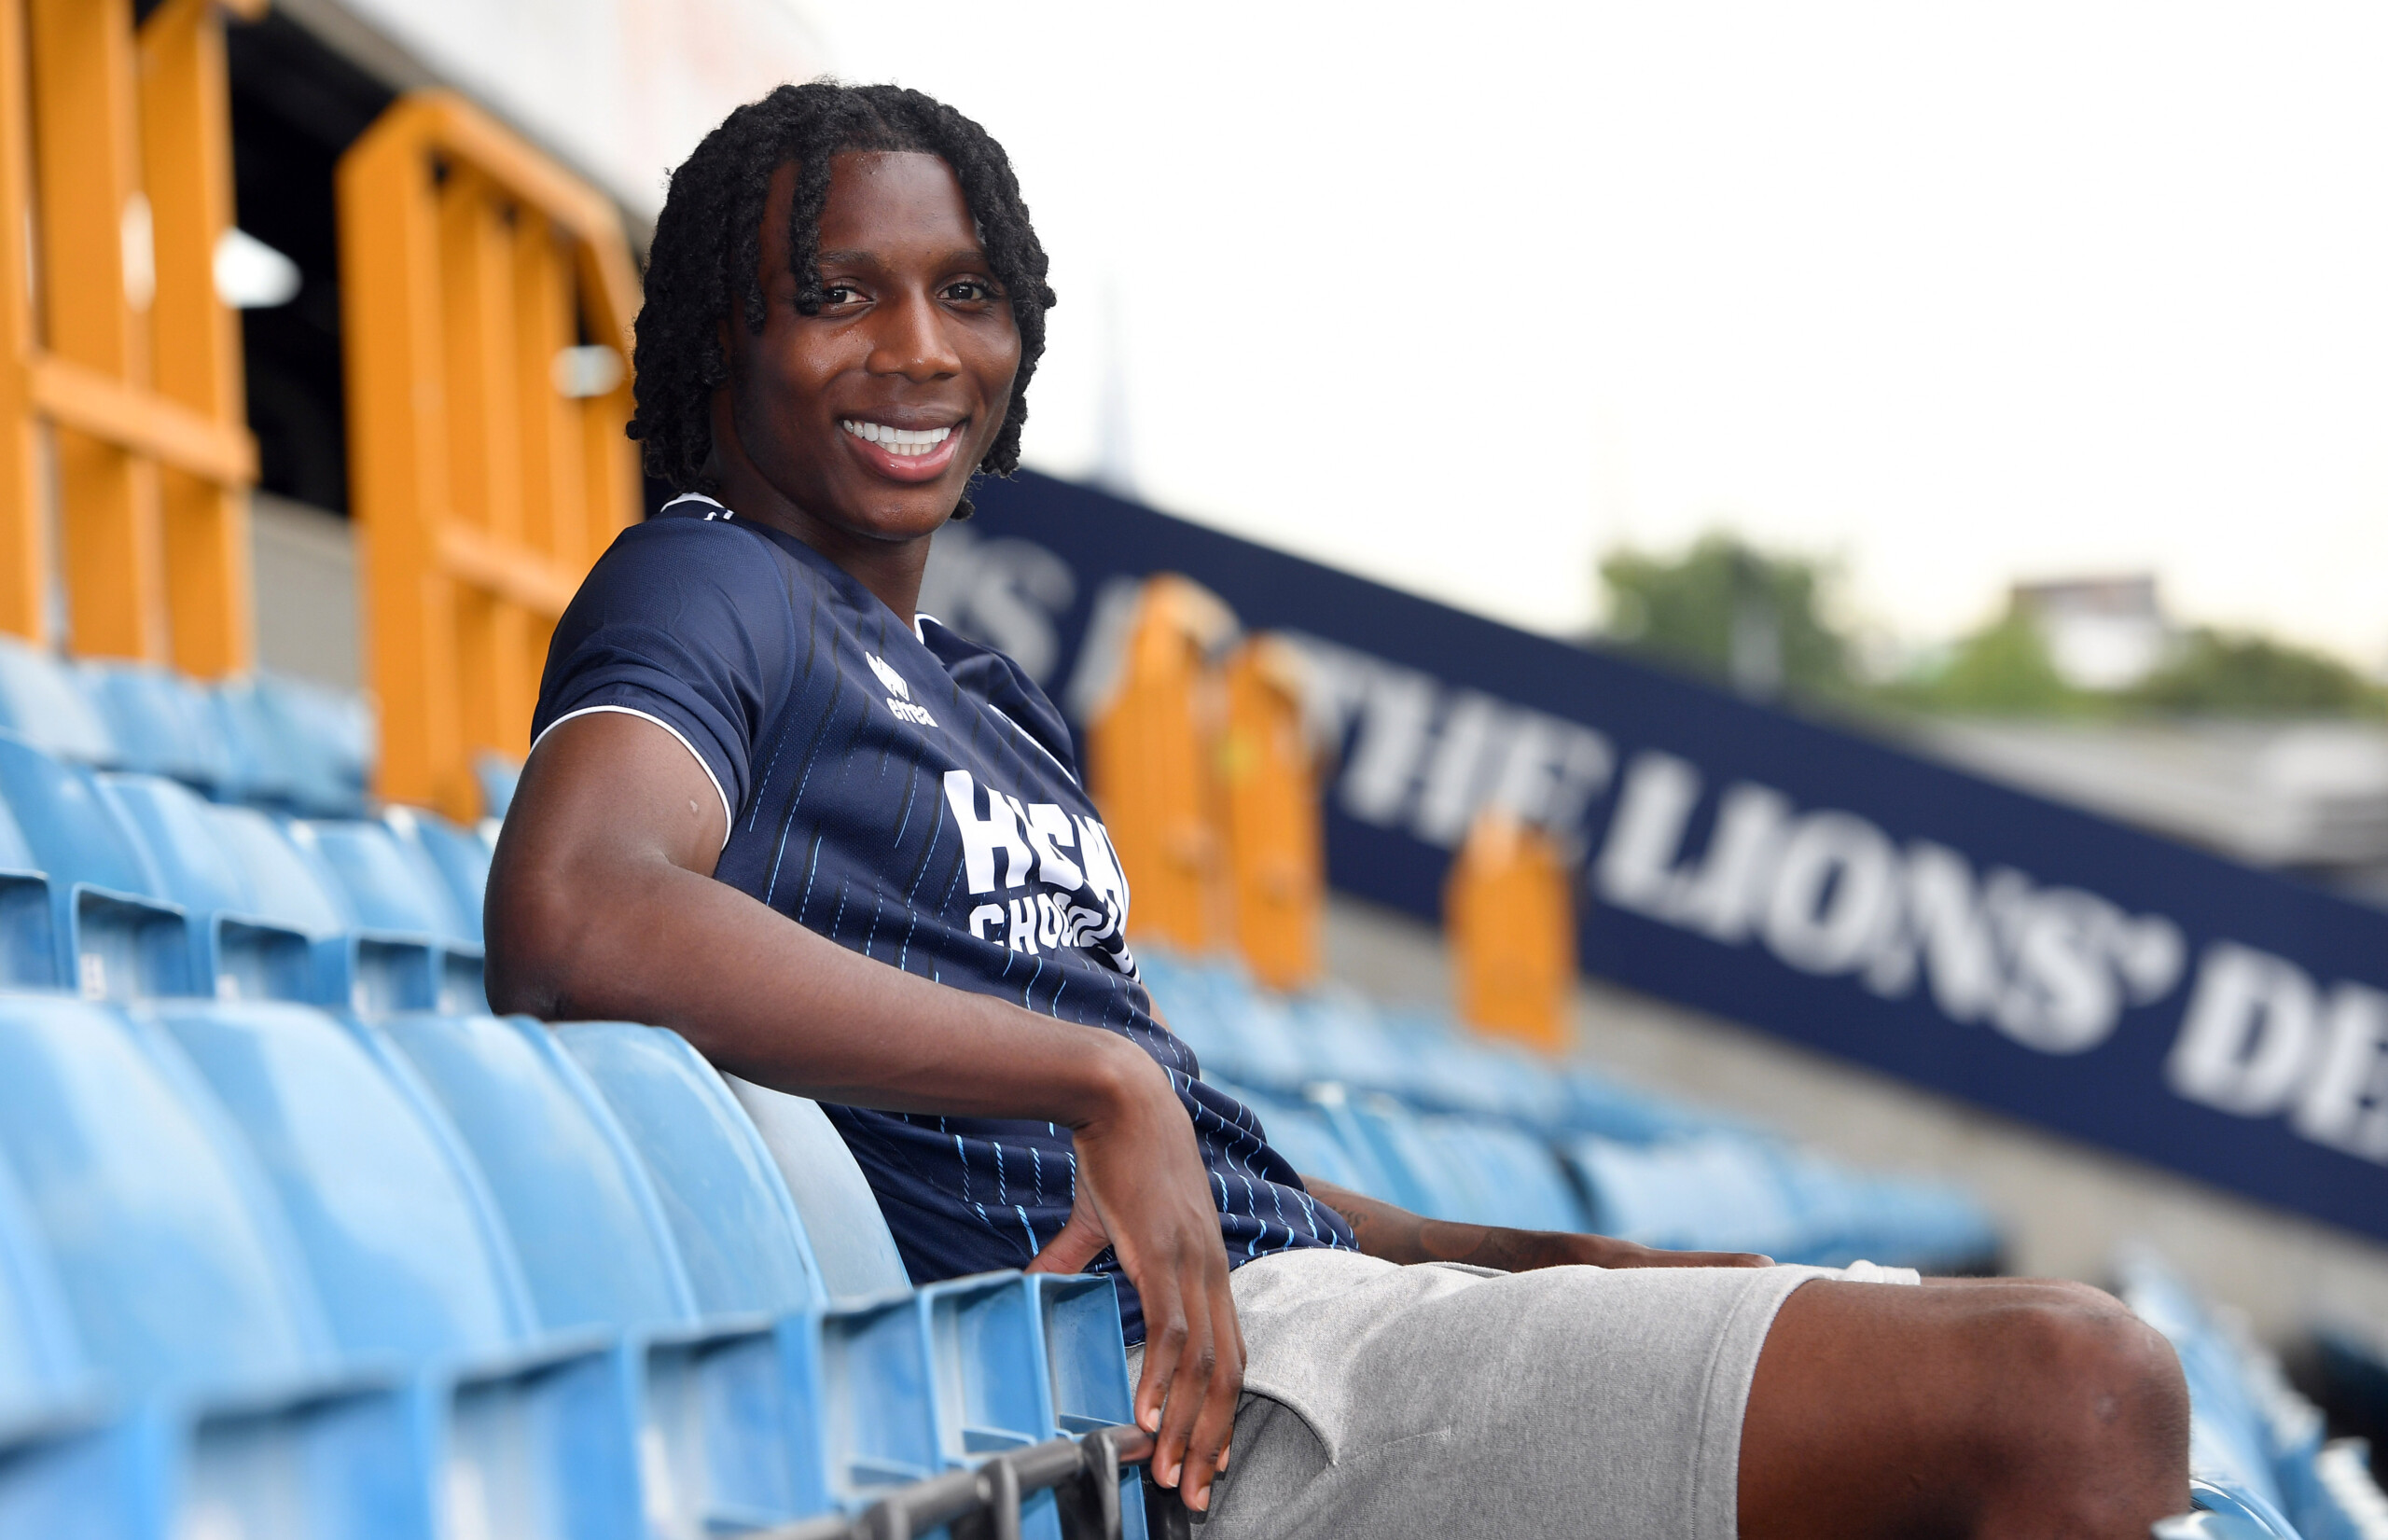 Millwall announce signing of Arsenal defender Brooke Norton-Cuffy on  season-long loan deal - Southwark News